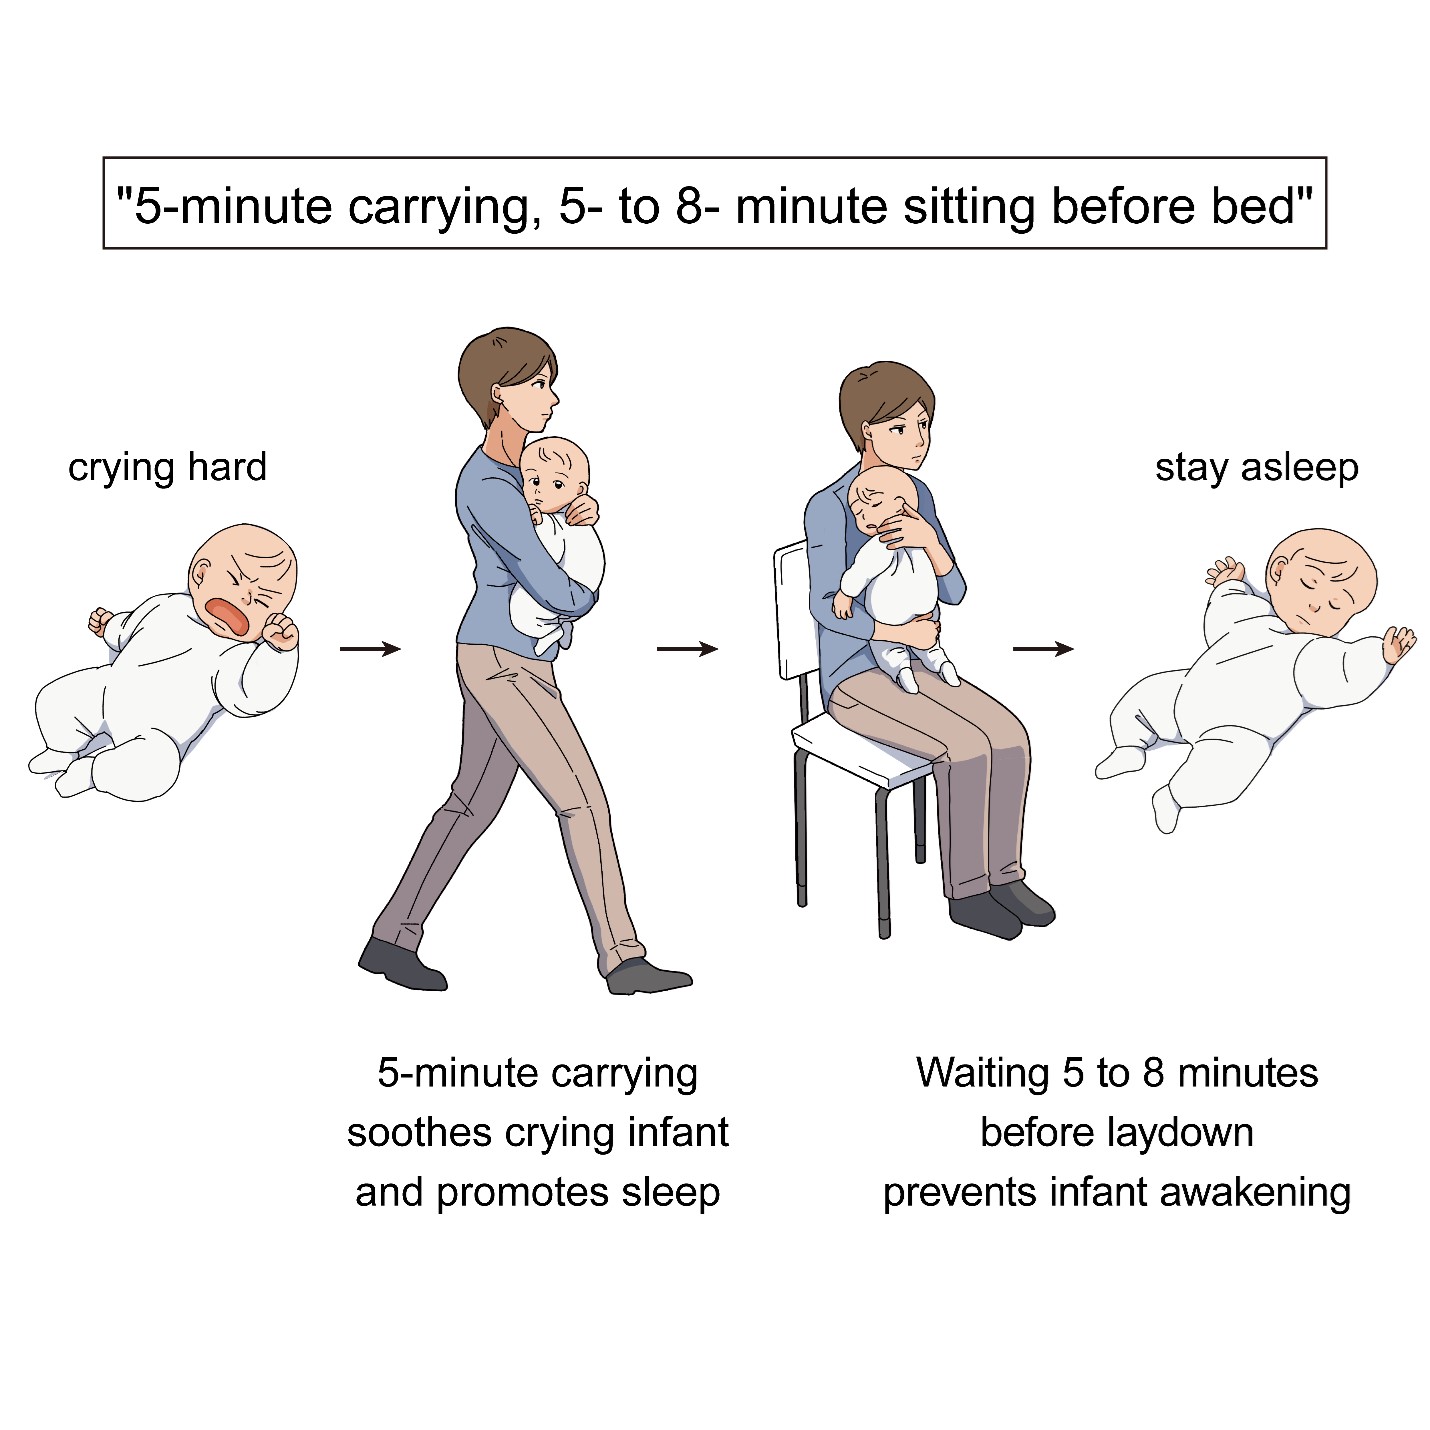 Walk then sit: Scientists identify the best to help babies stop crying